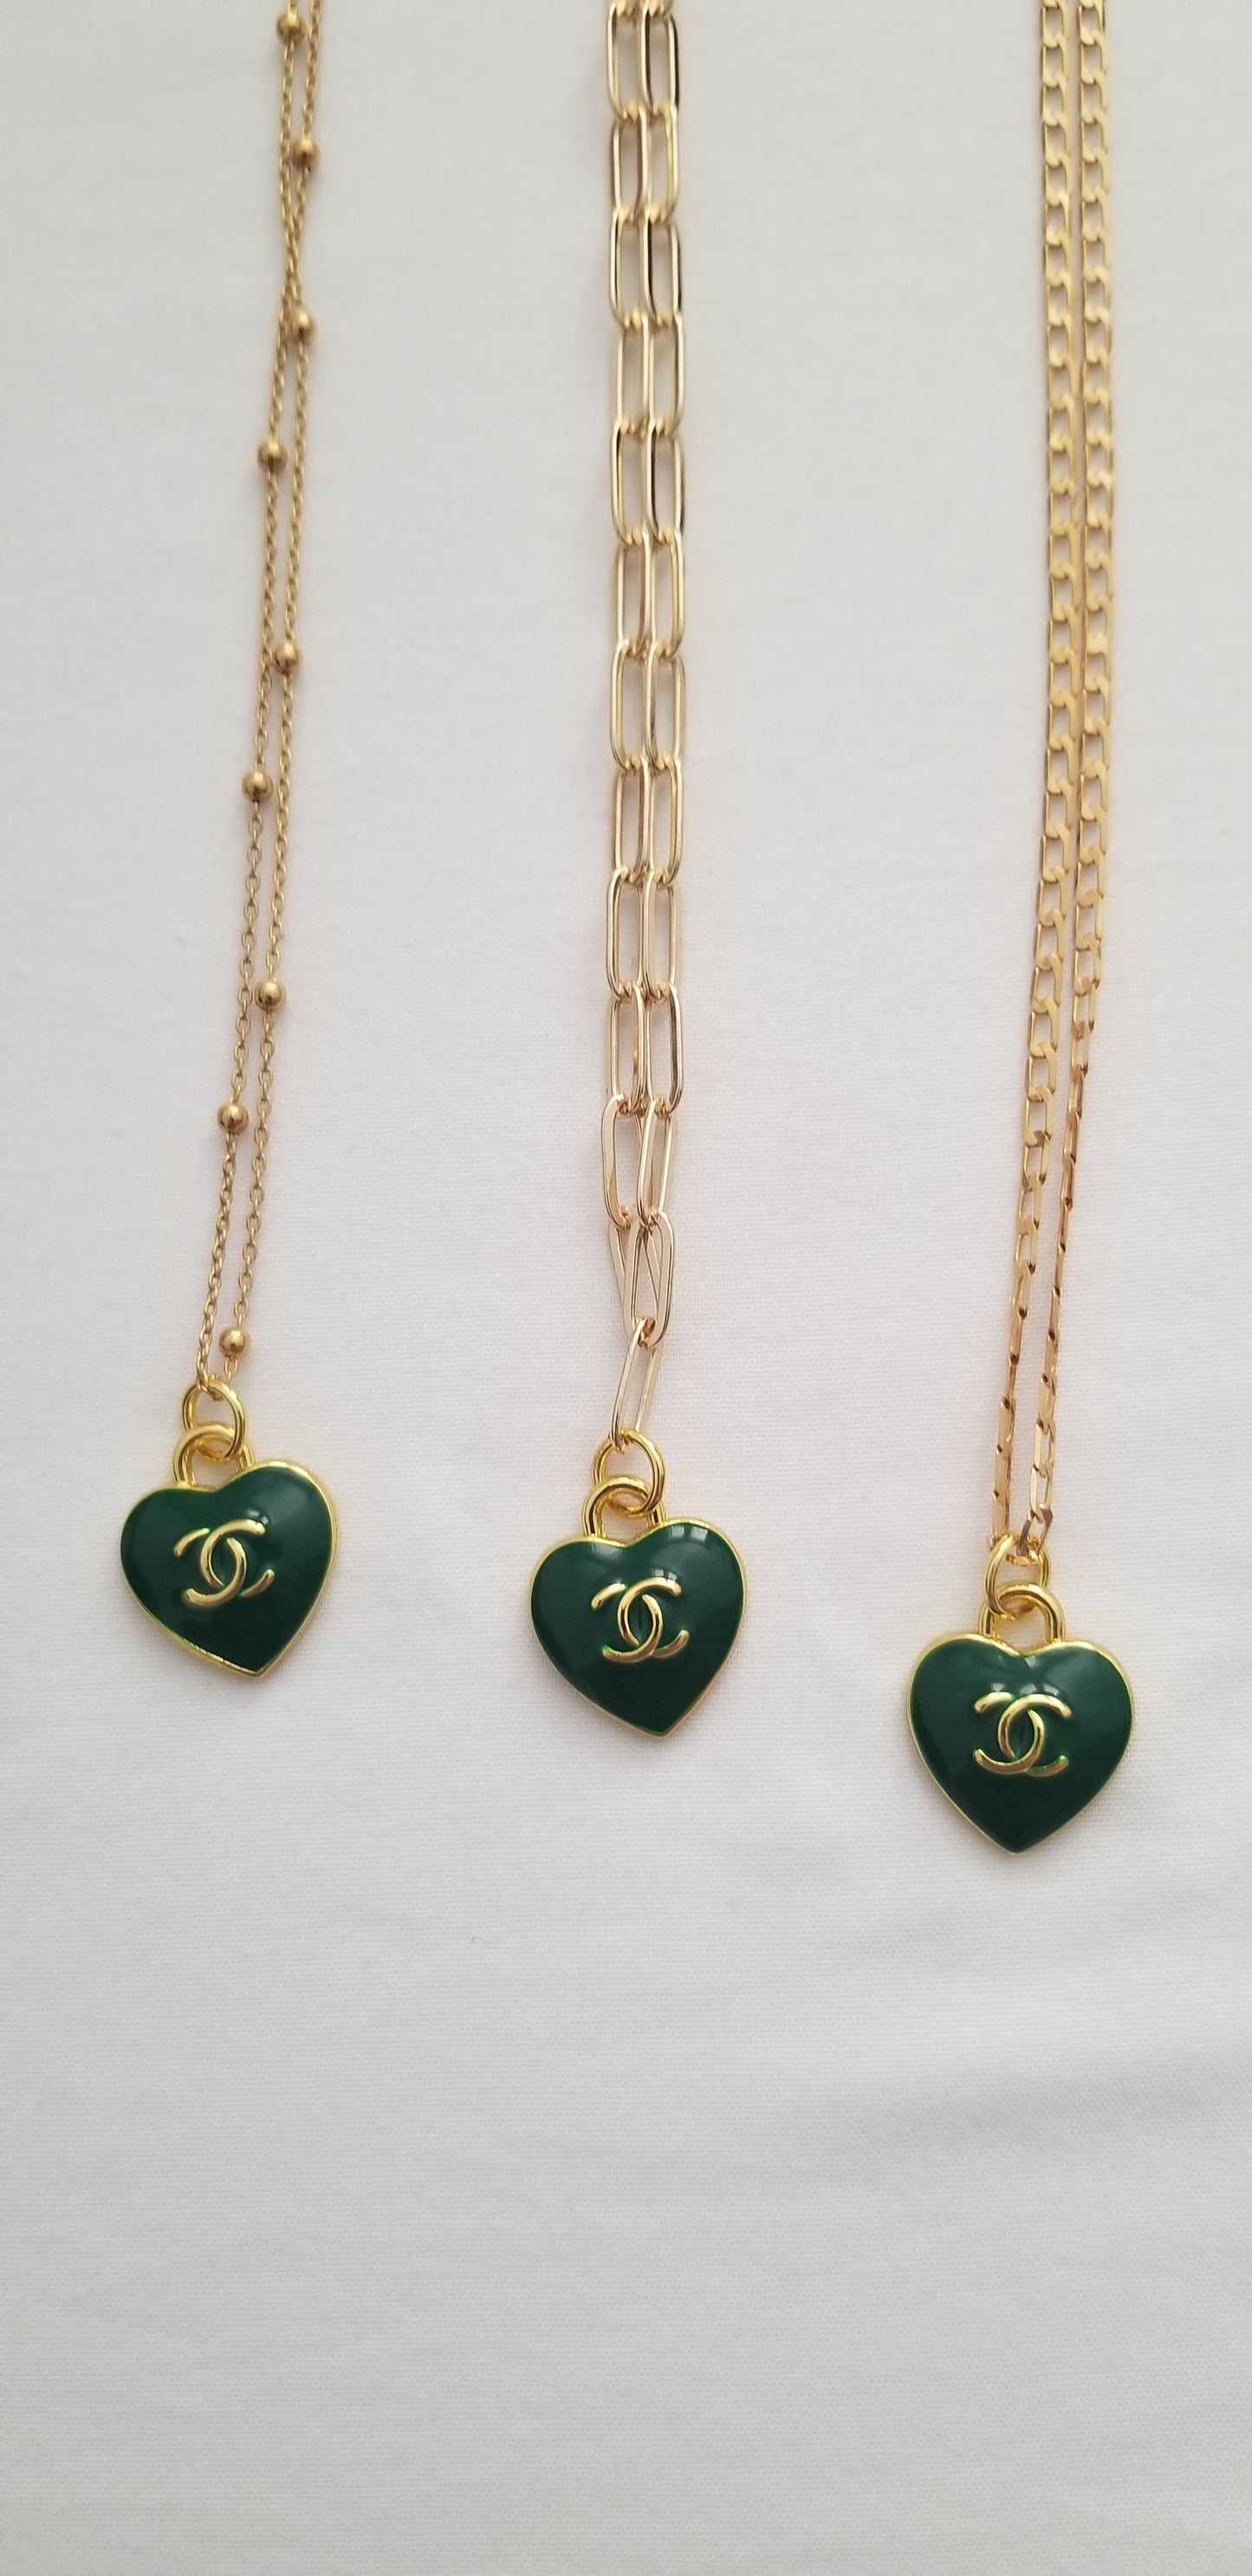 Chanel Green Heart Necklace Repurposed